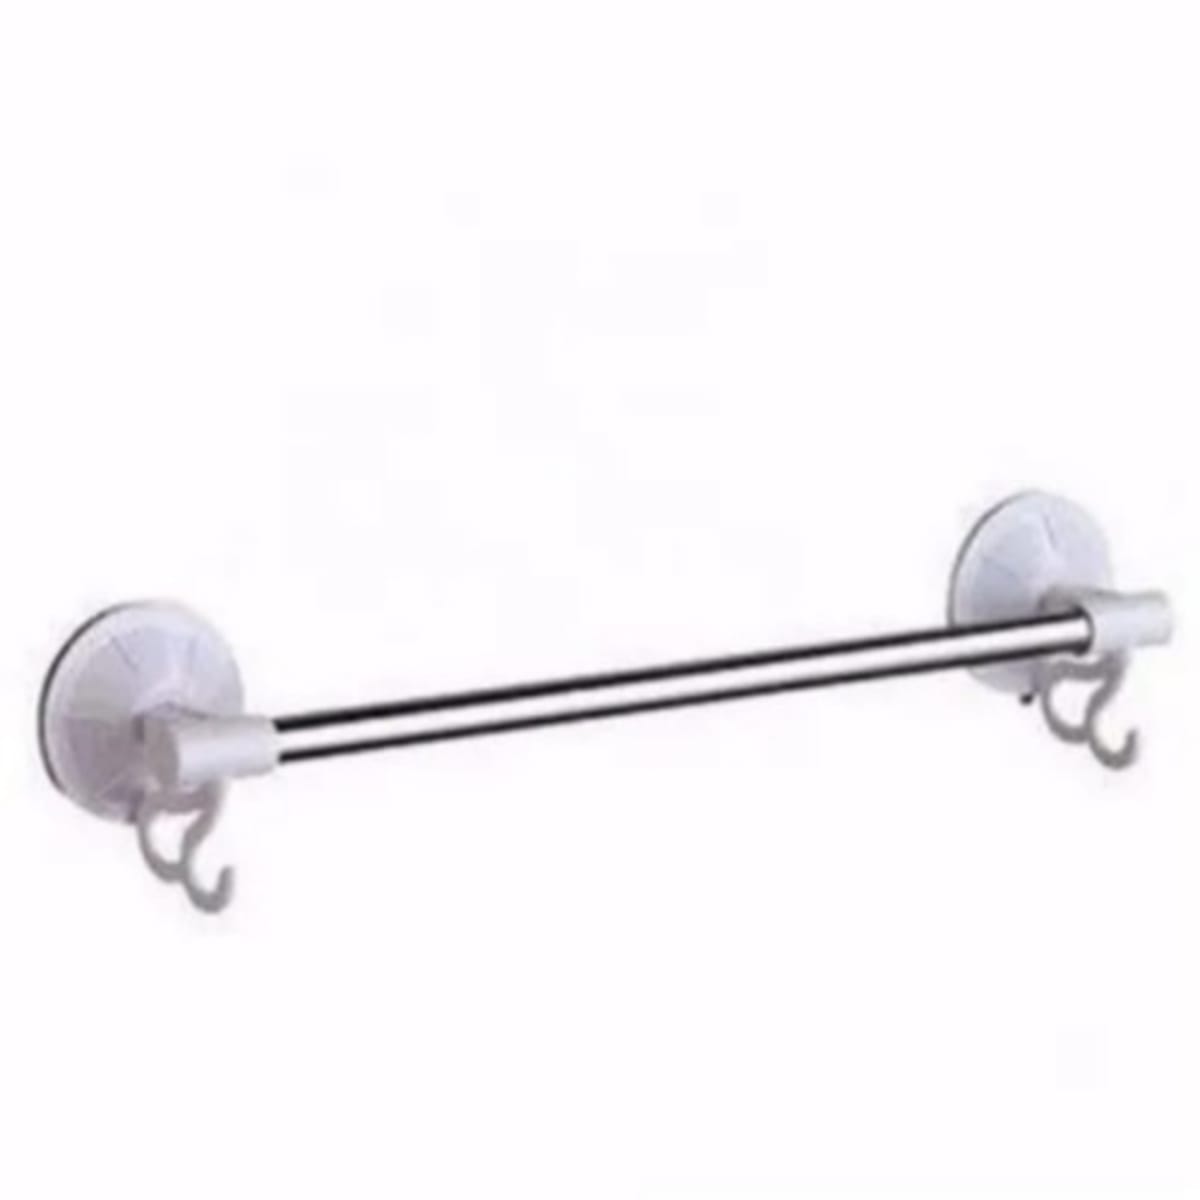 Towel Hanger With Suction